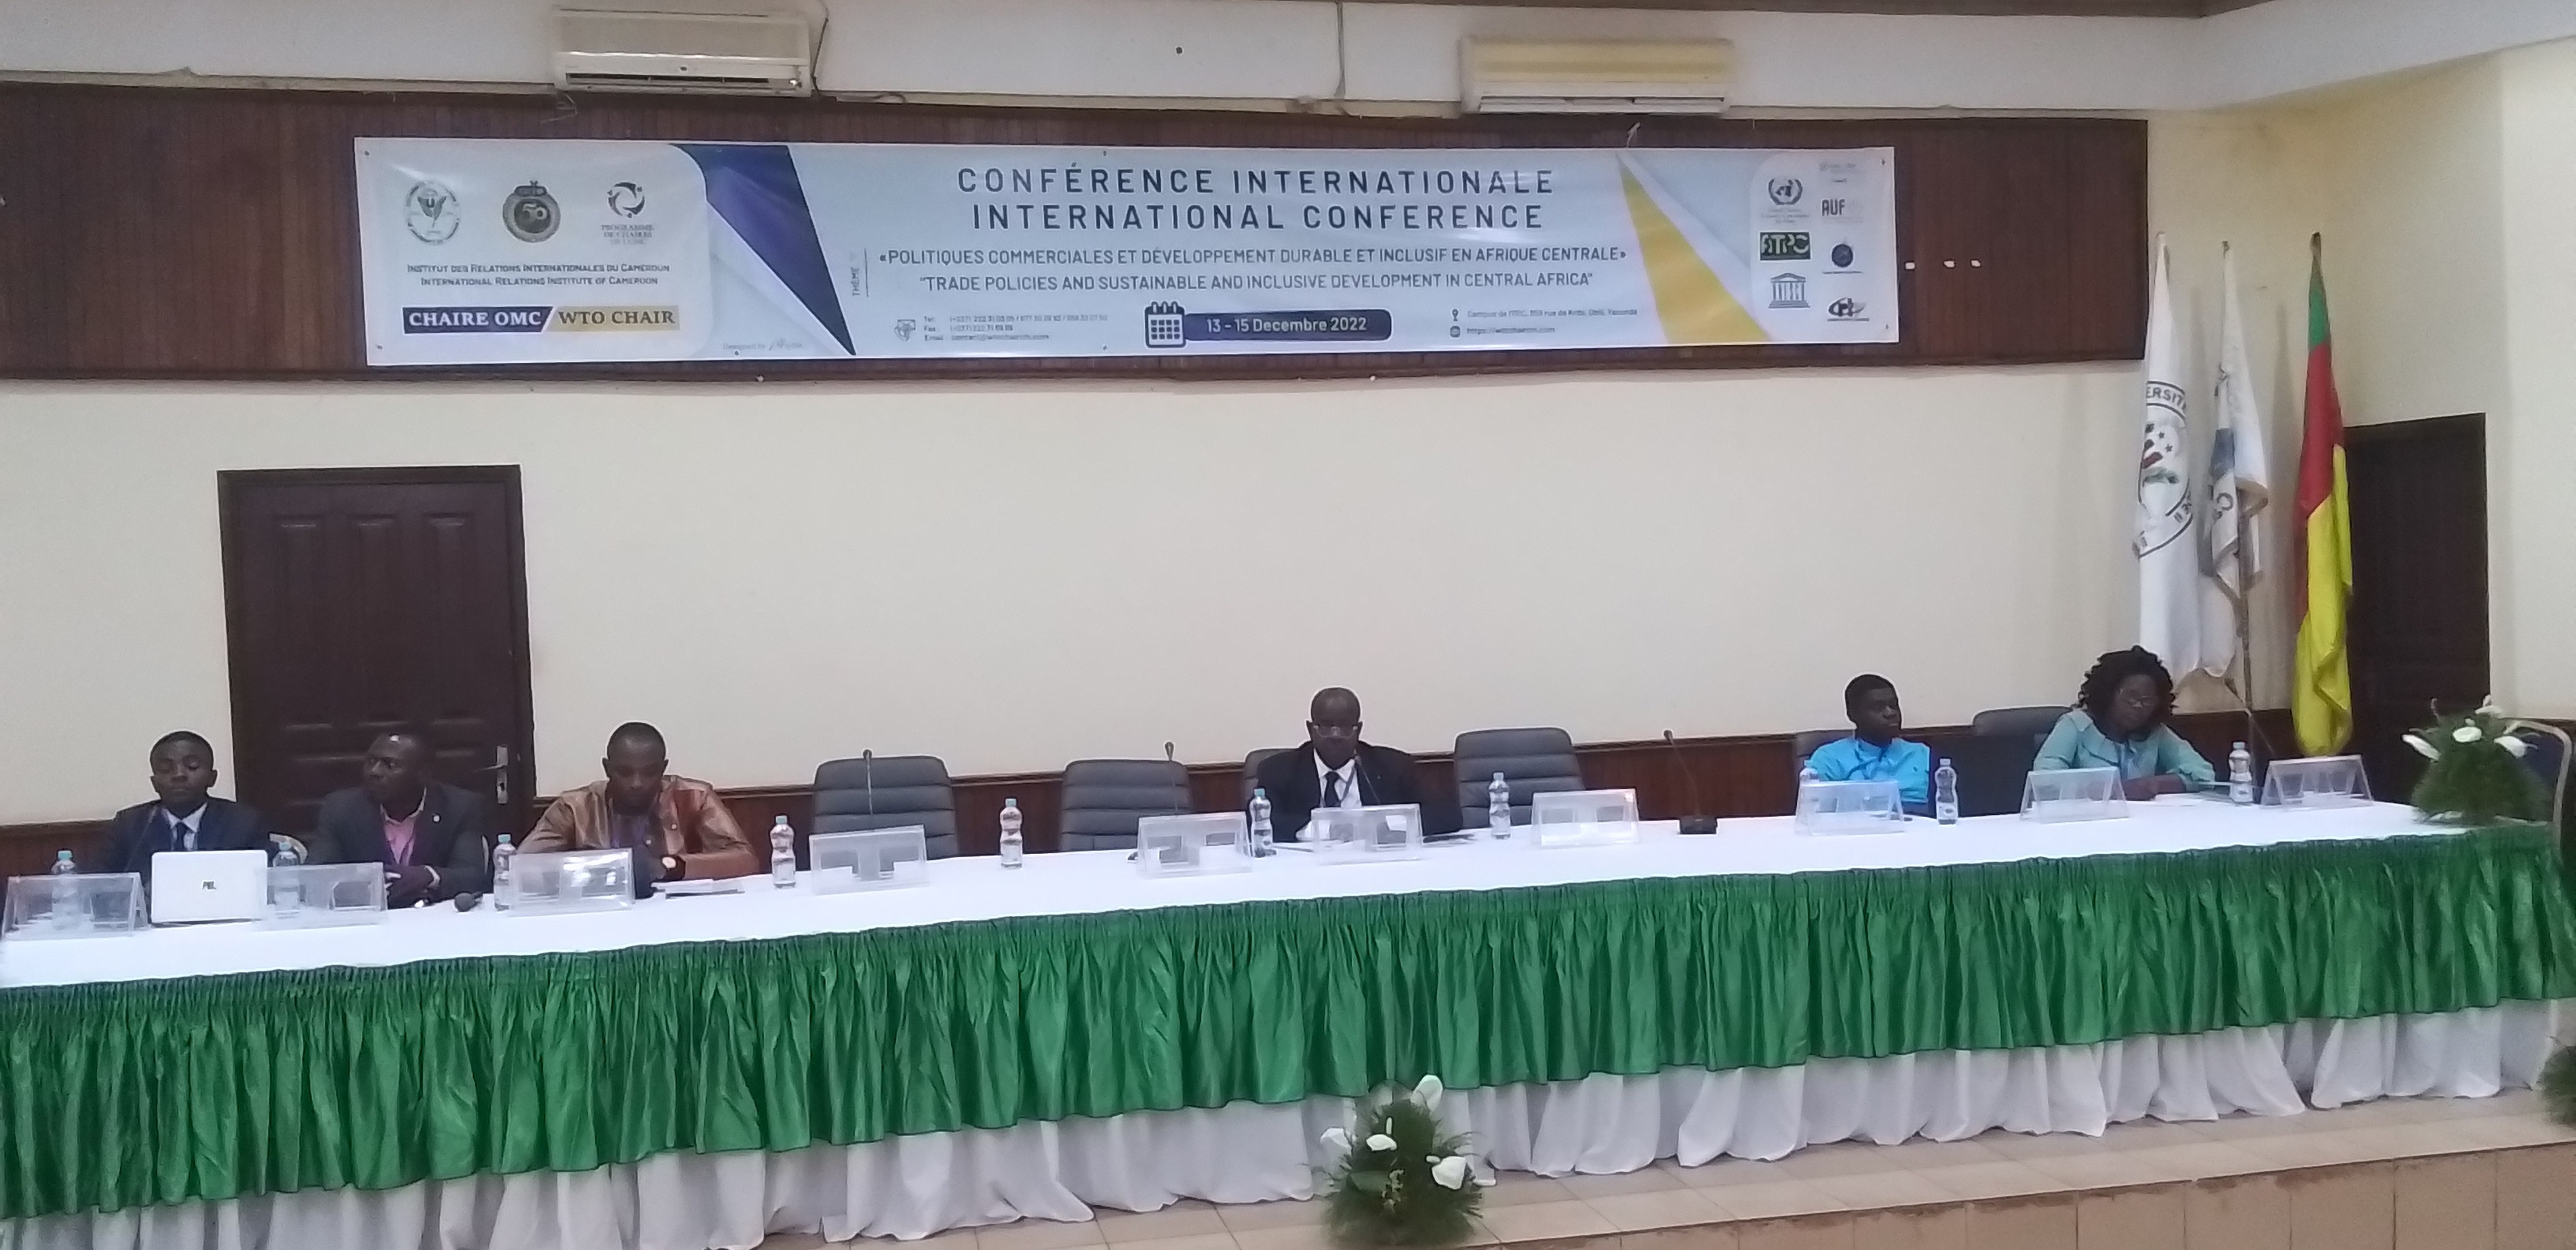 International Conference on Trade Policies and Sustainable and Inclusive Development in Central Africa